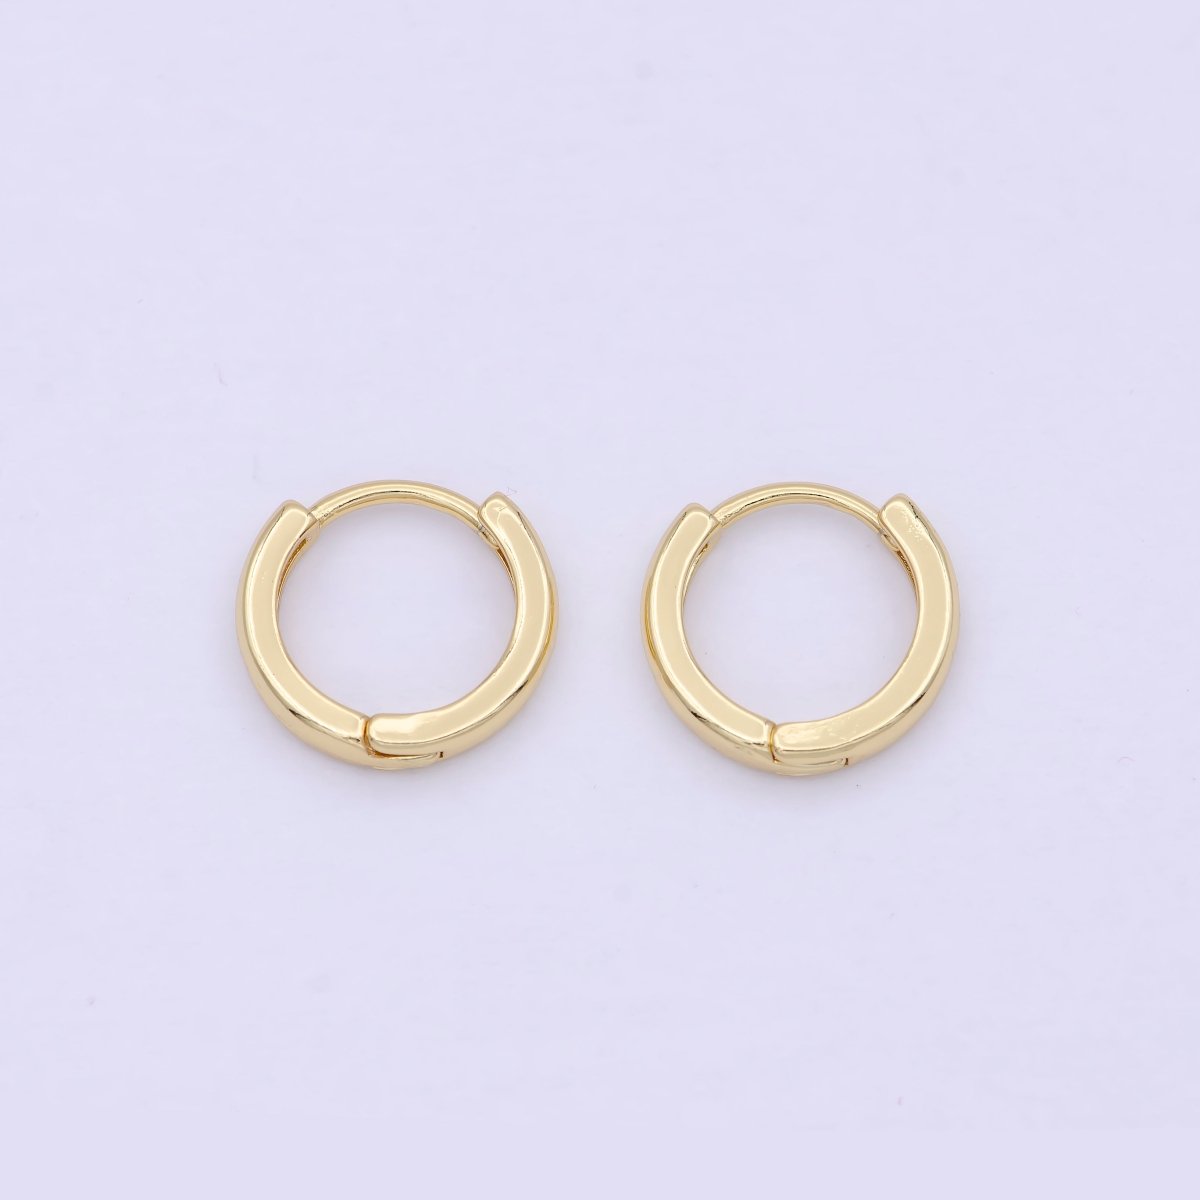 Tiny Gold Rounded Huggie Hoop Earrings, Small Hoop Earring, Cartilage Hoop, Huggie Tragus Hoop, Gold Conch Hoop p-244 - DLUXCA